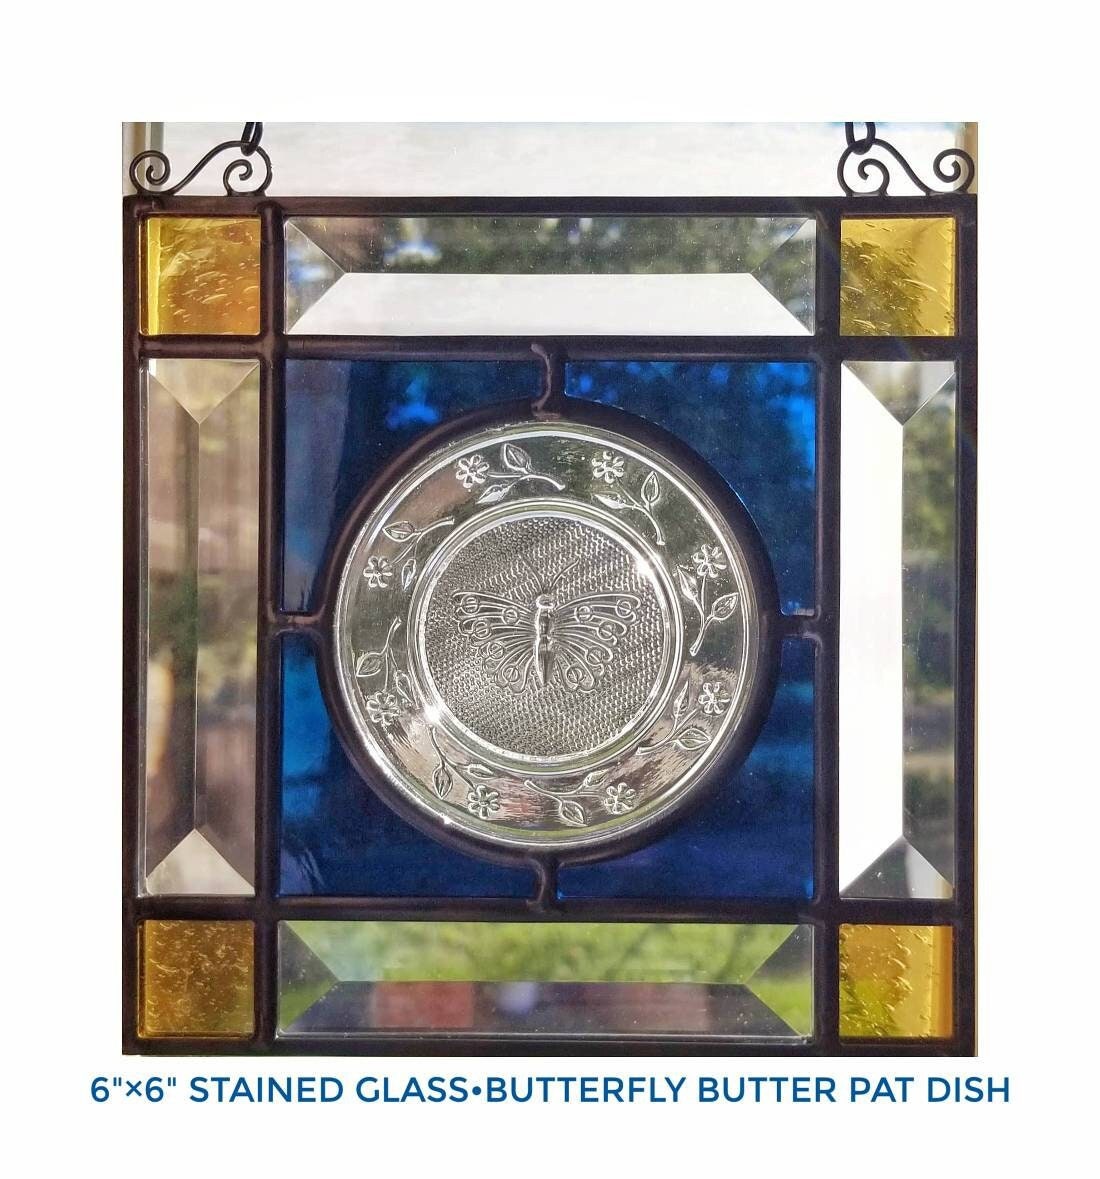 Butterfly Suncatcher, Butter Pat dish, plate. Glass Art window hanging, 6" Square. Vivid Blue, Vintage Stained Glass. Clear Bevels.